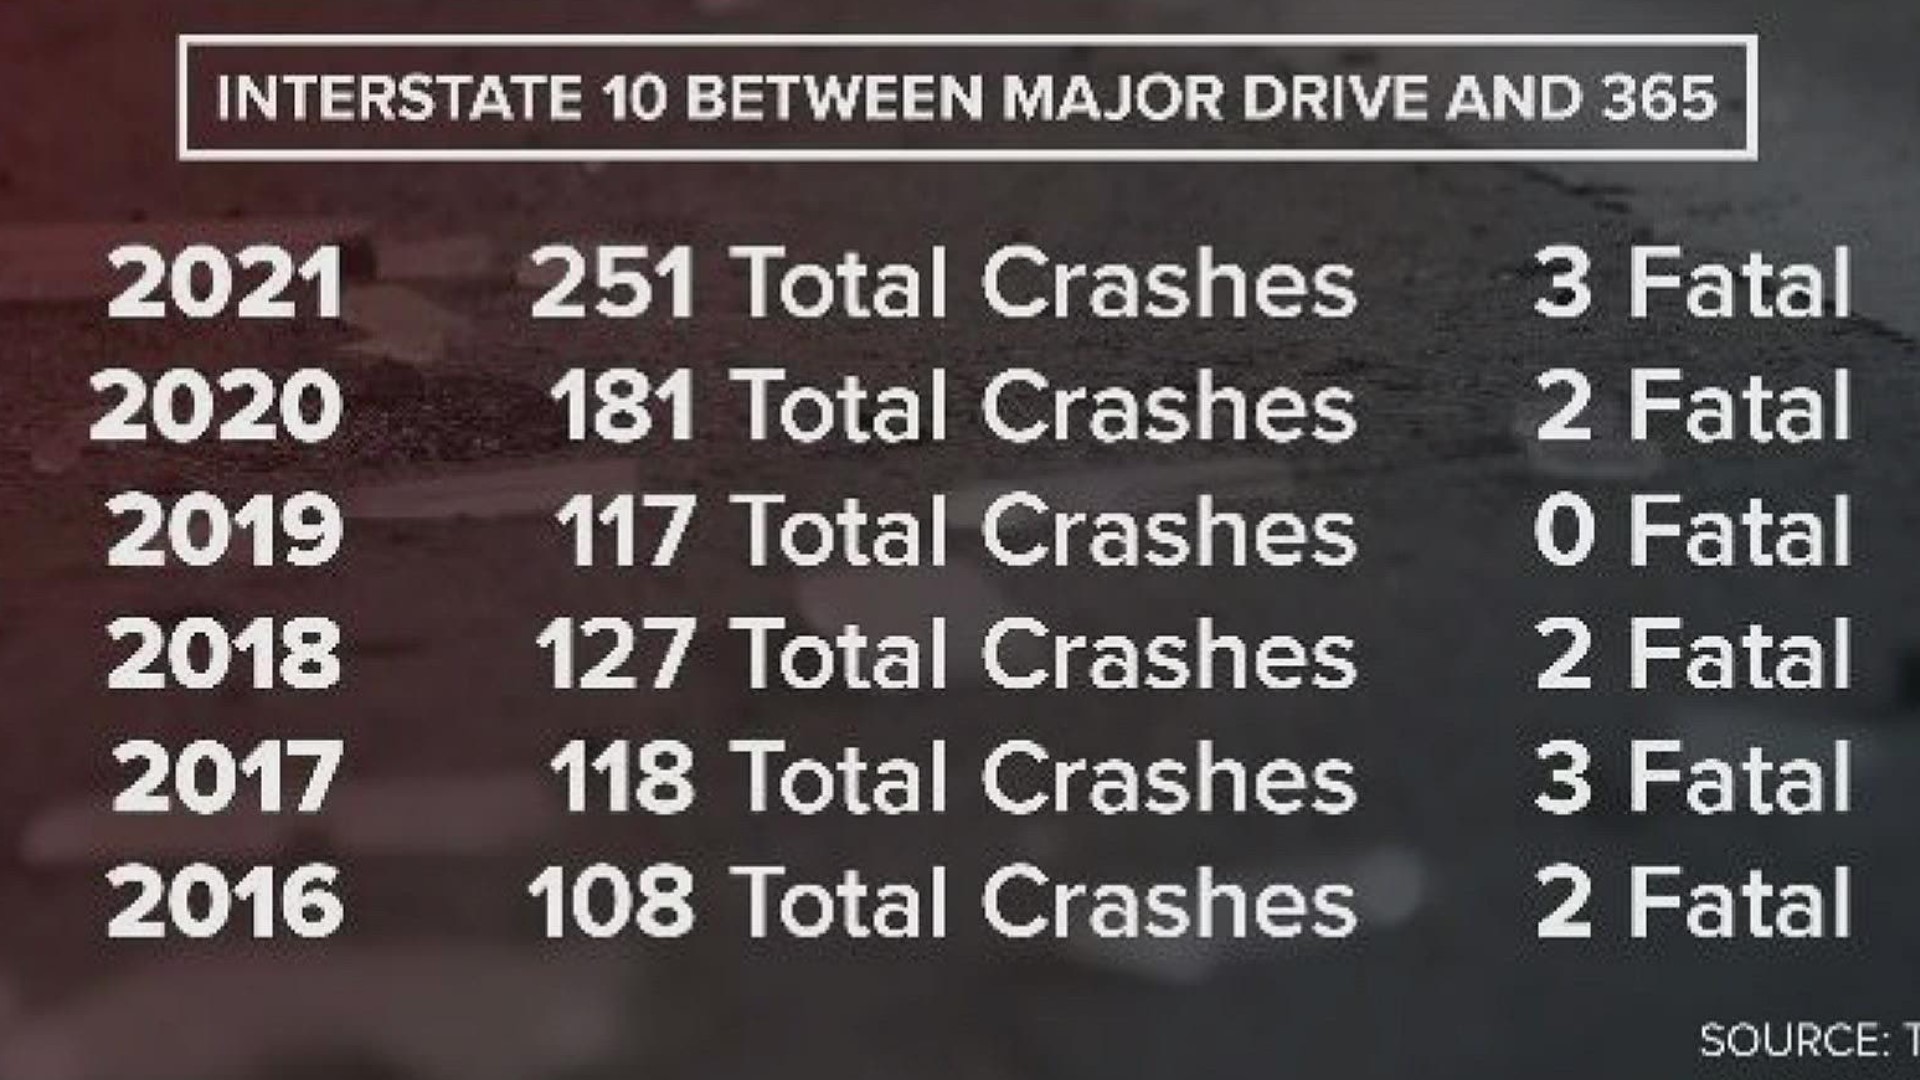 Data shows I-10 between Major Drive and FM 365 has seen more than 250 crashes just this year.